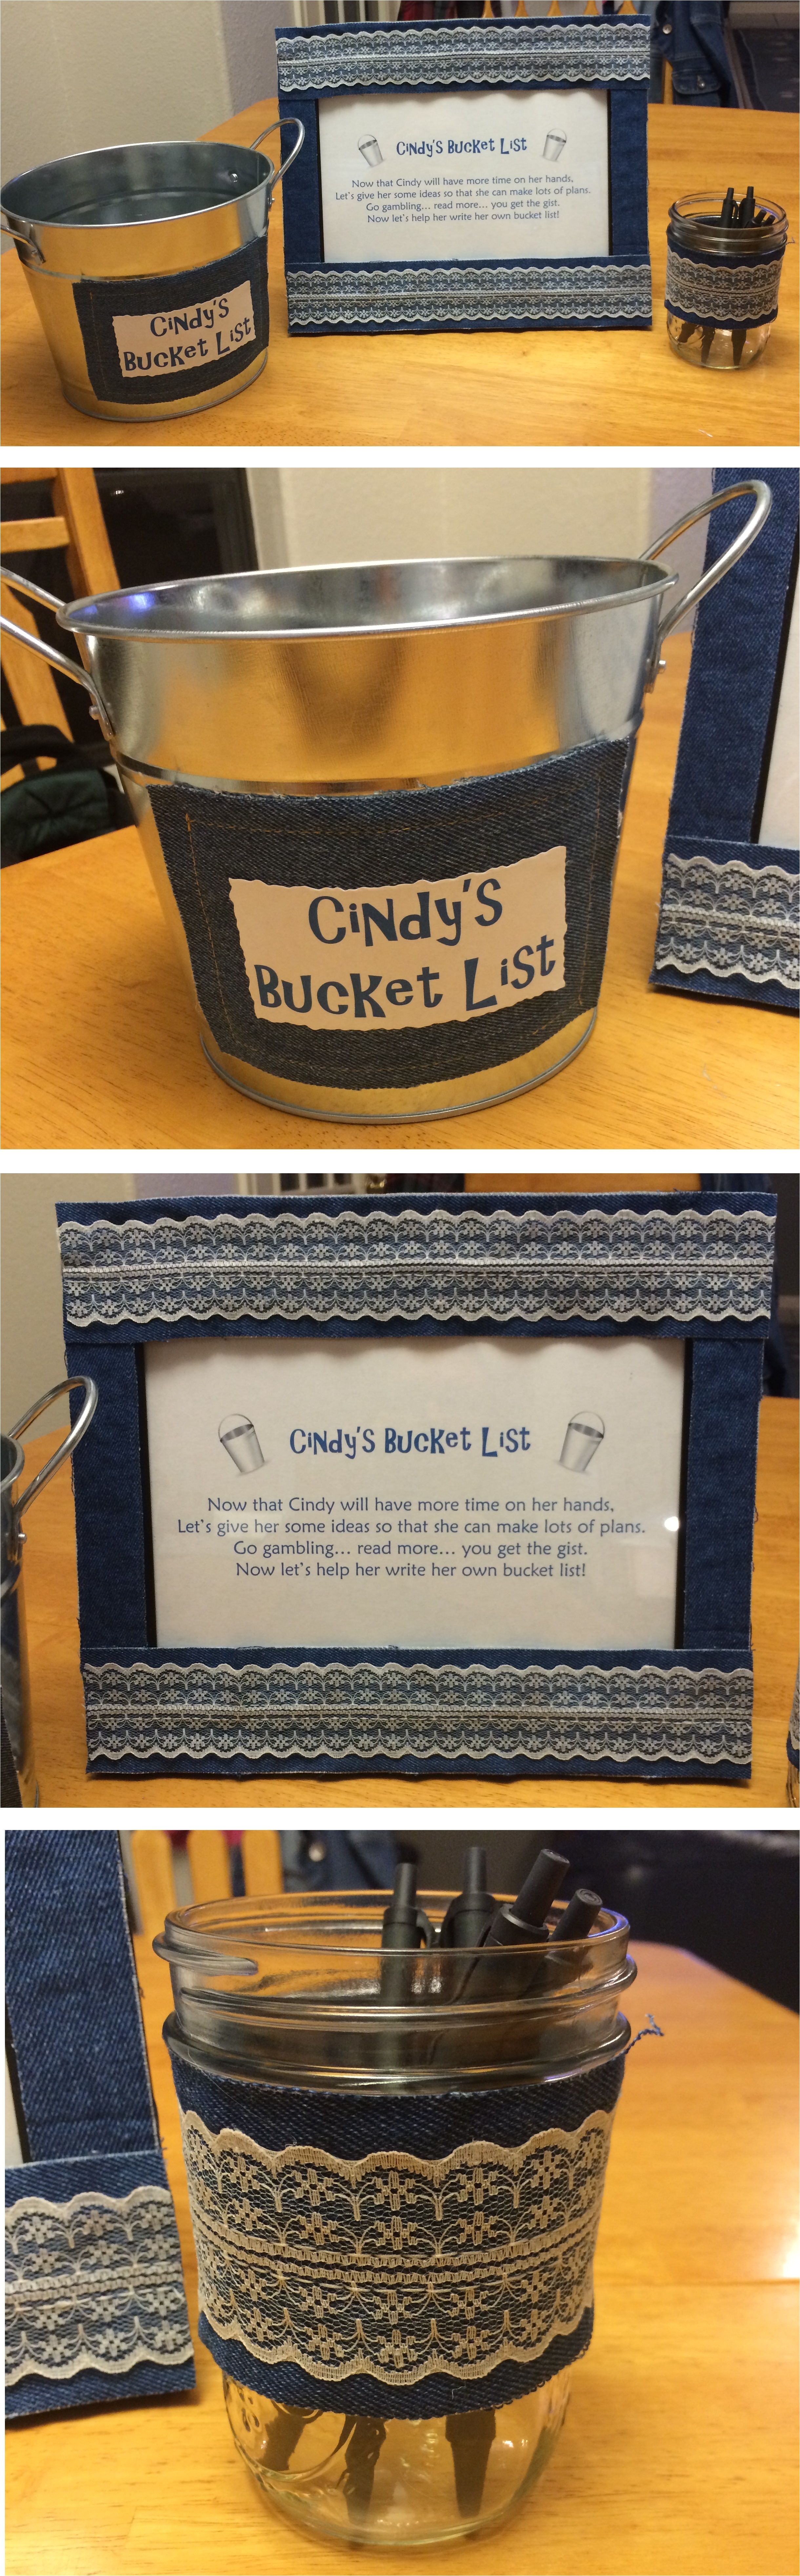 retirement party idea bucket list decorate a bucket for guests to fill with ideas for the retiree to do with their new found freedom